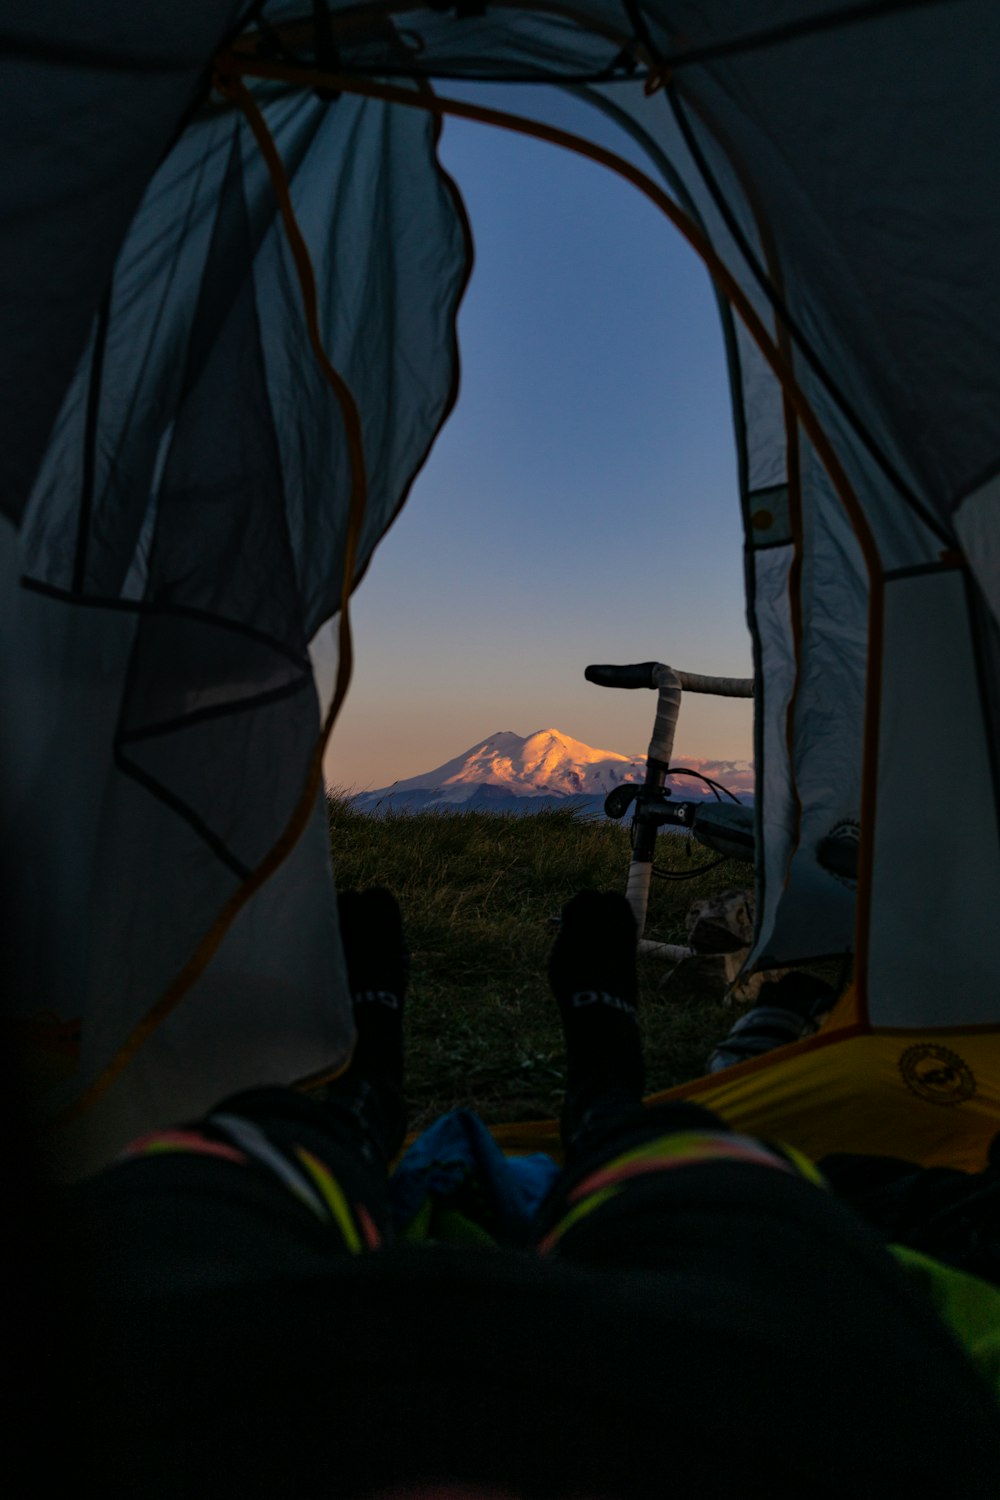 a view of a mountain from inside a tent